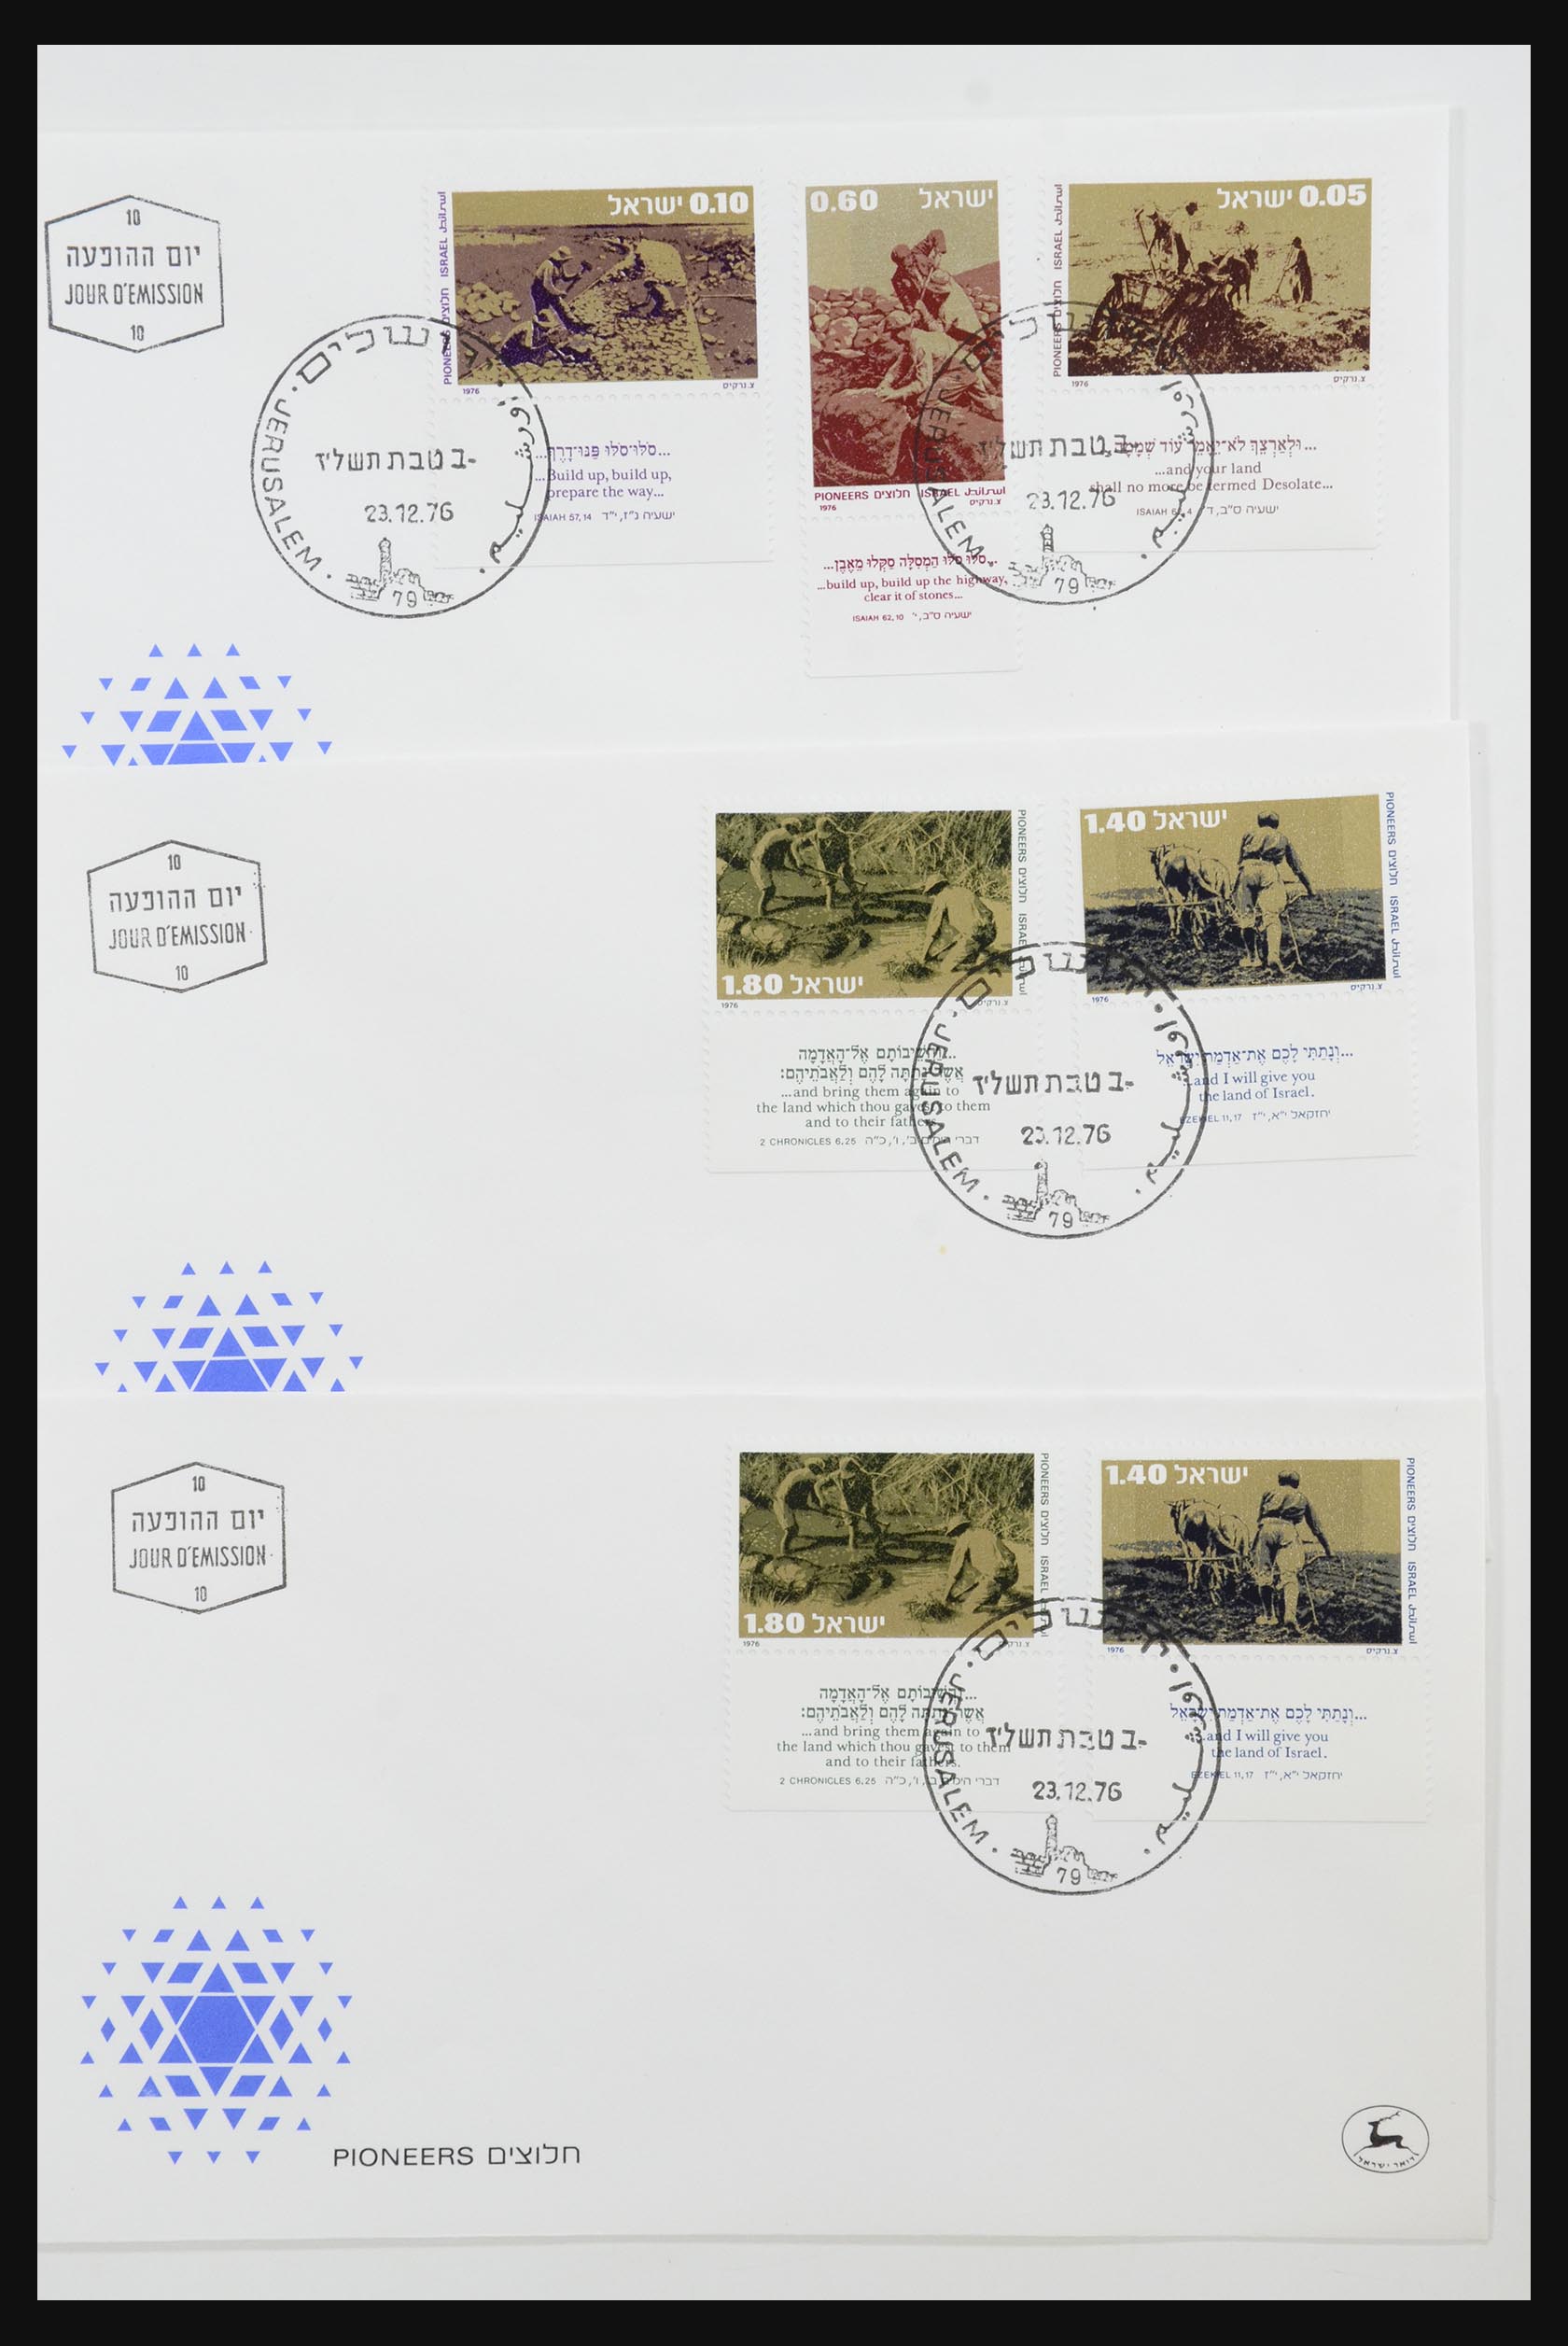 31924 003 - 31924 Israel first day cover collection 1957-2003.